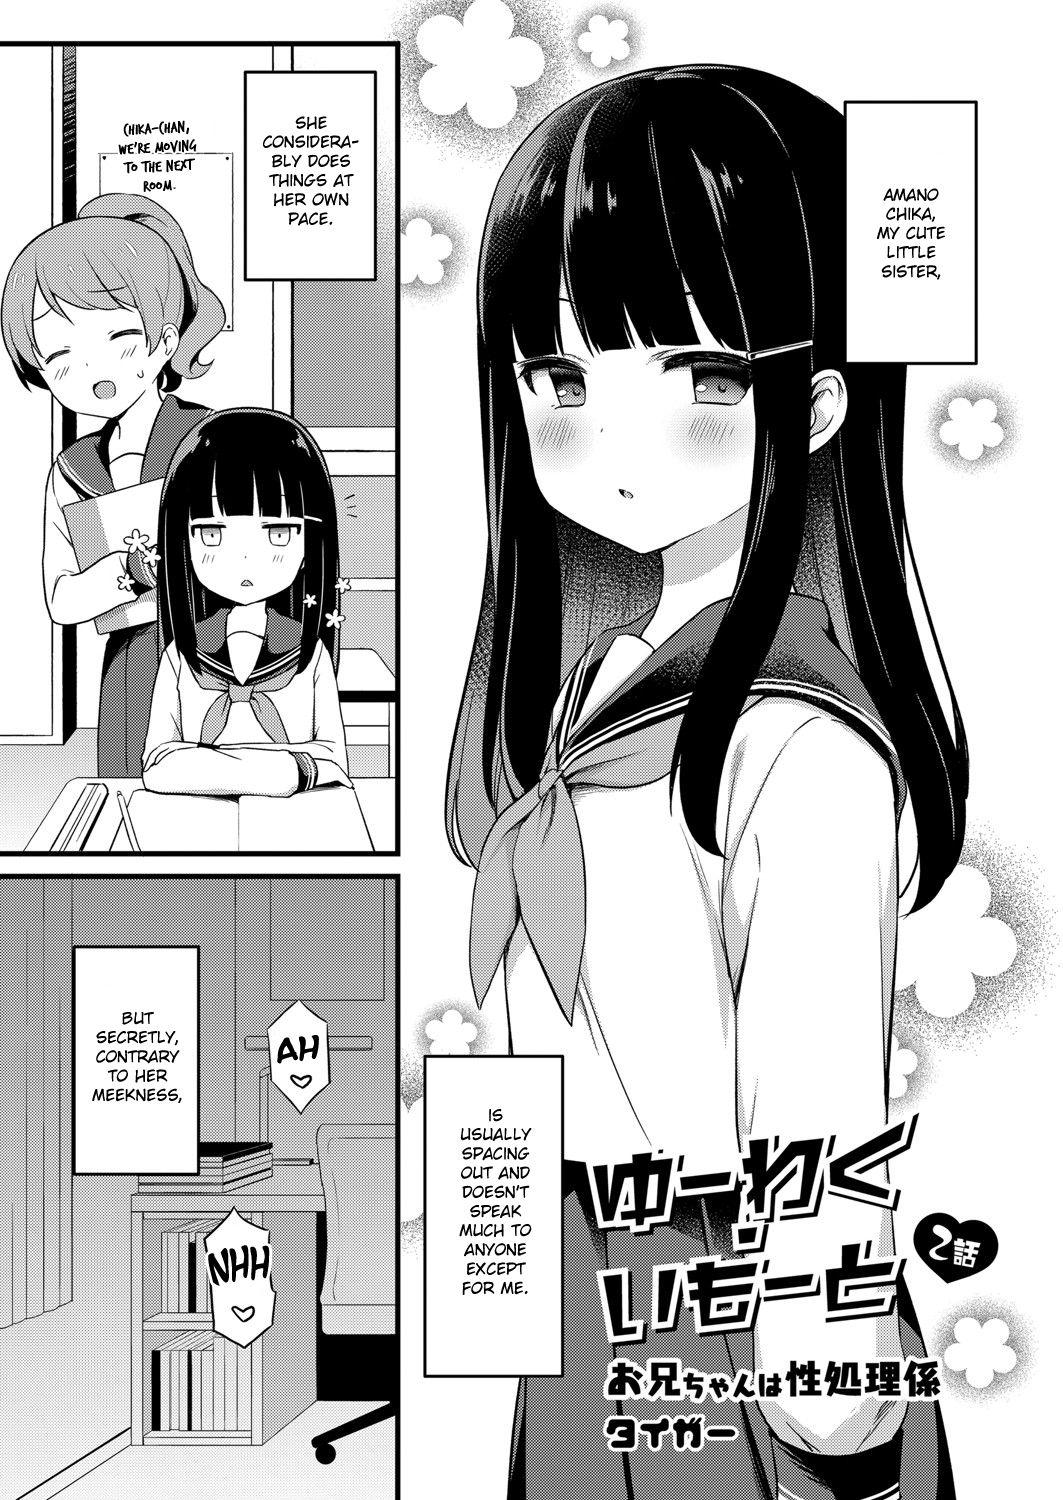 Orgasms [Tiger] Yuuwaku・Imouto #2 Onii-chan wa seishori gakari | Little Sister Temptation #2 Onii-chan is in Charge of My Libido Management (COMIC Reboot Vol. 07) [English] [Digital] Thylinh - Page 1